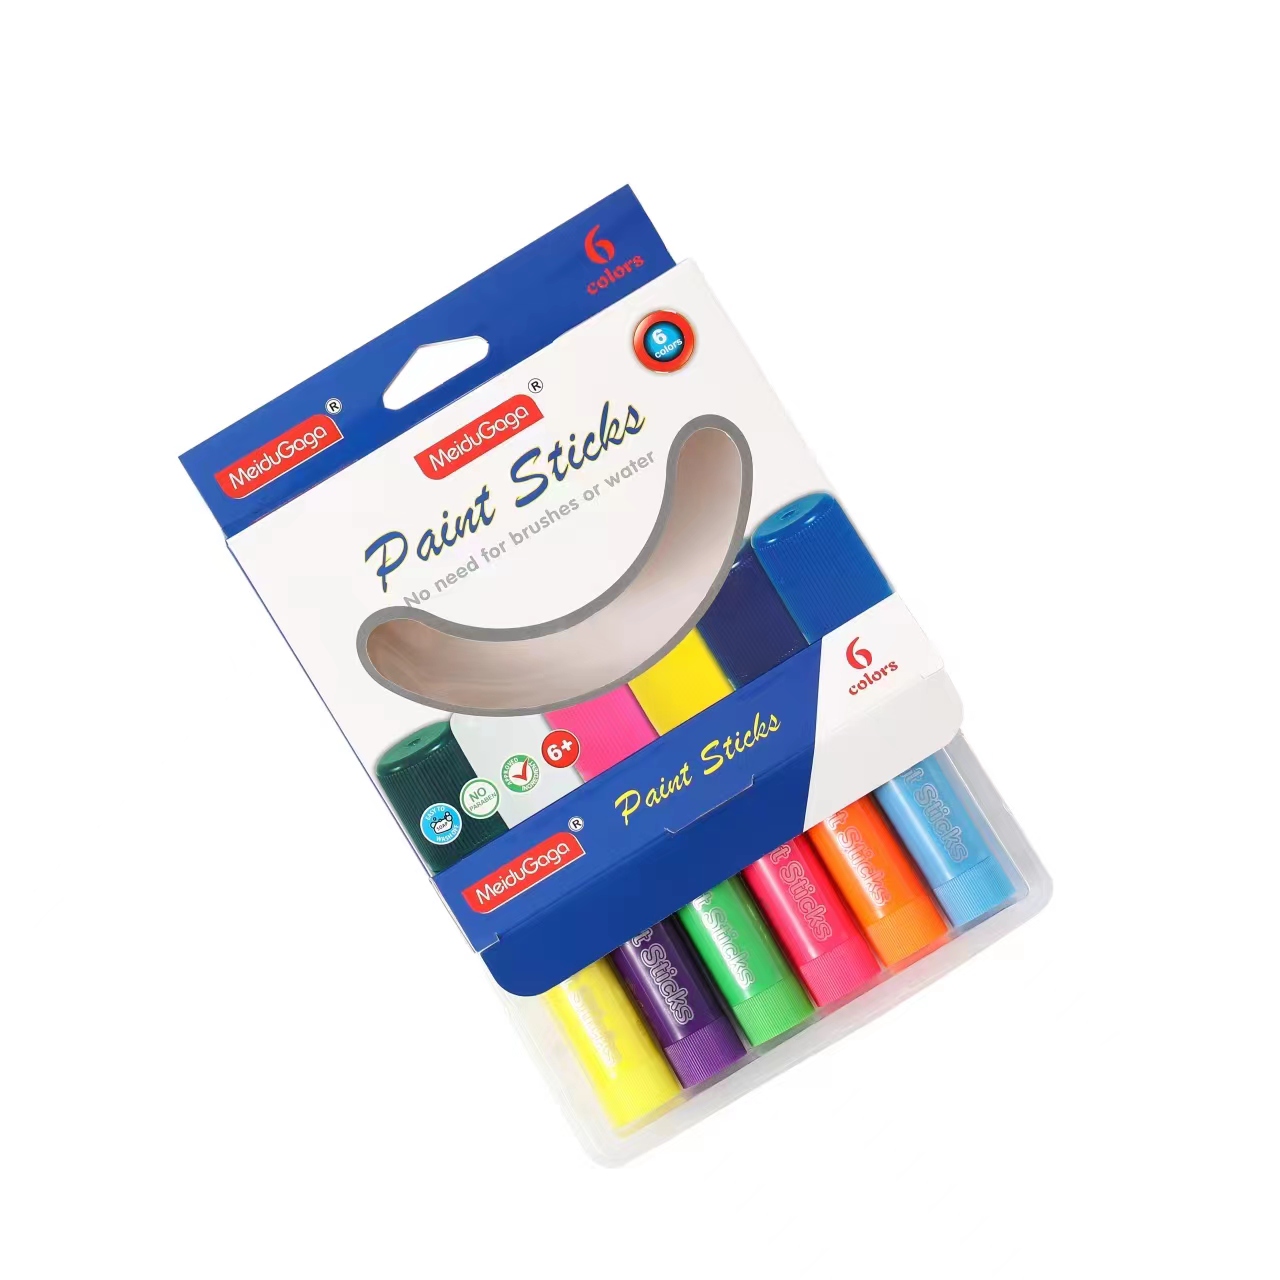 Tempera Paint Sticks, 32 Colors Solid Tempera Paint for Kids, Super Quick  Drying, No-Toxic, Works Great on Paper Wood Glass Ceramic Canvas